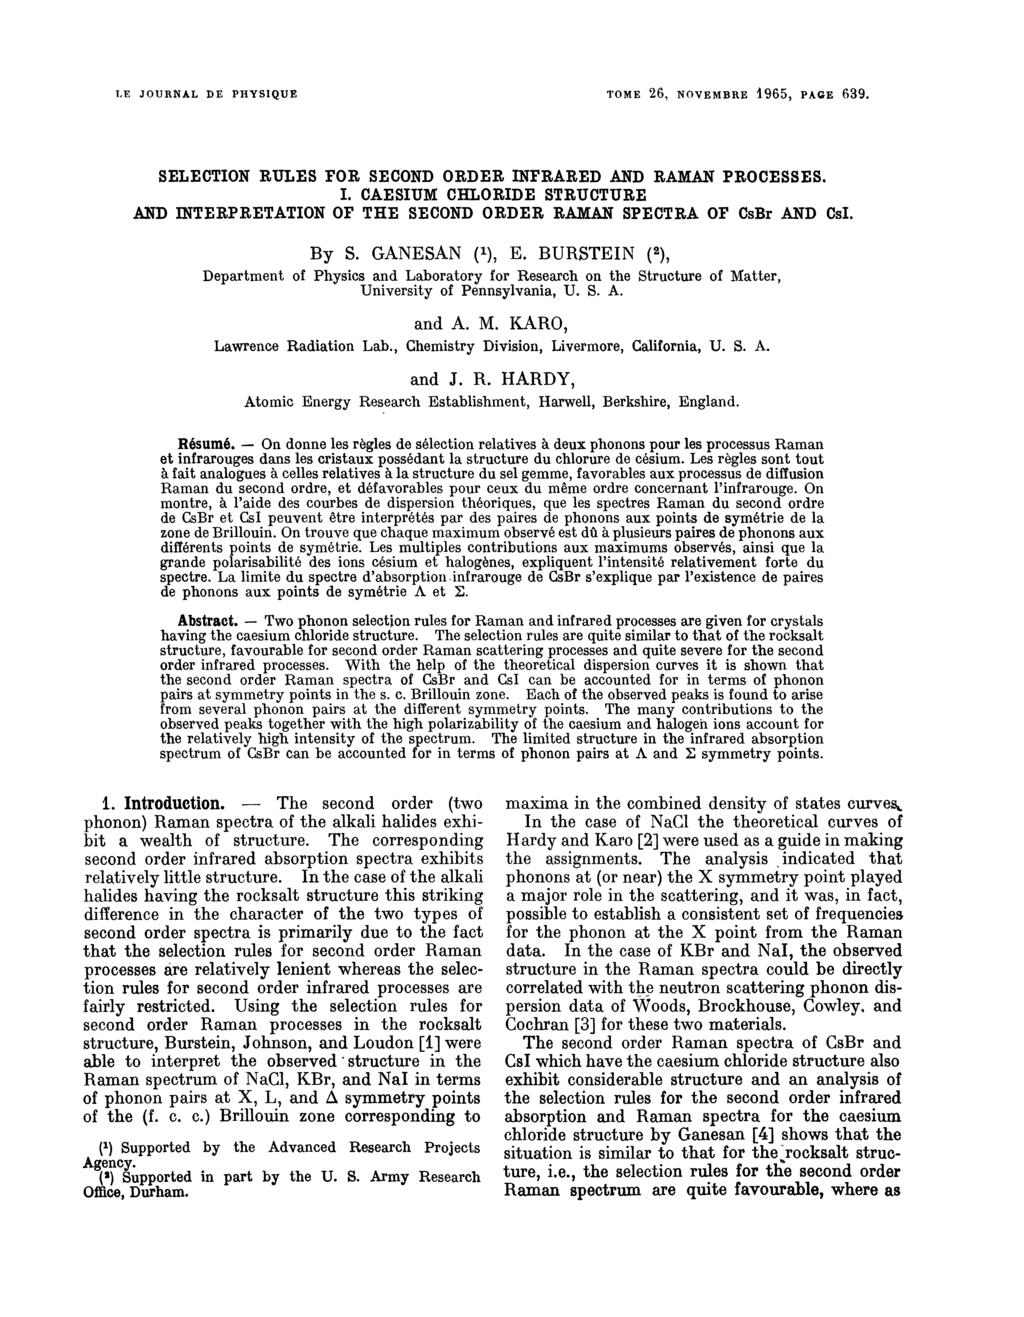 The t,e JOURNAL DE PHYSIQUE TOME 26, NOVEMBRE 1965, 639. SELECTION RULES FOR SECOND ORDER INFRARED AND RAMAN PROCESSES. I. CAESIUM CHLORIDE STRUCTURE AND INTERPRETATION OF THE SECOND ORDER RAMAN SPECTRA OF CsBr AND CsI.